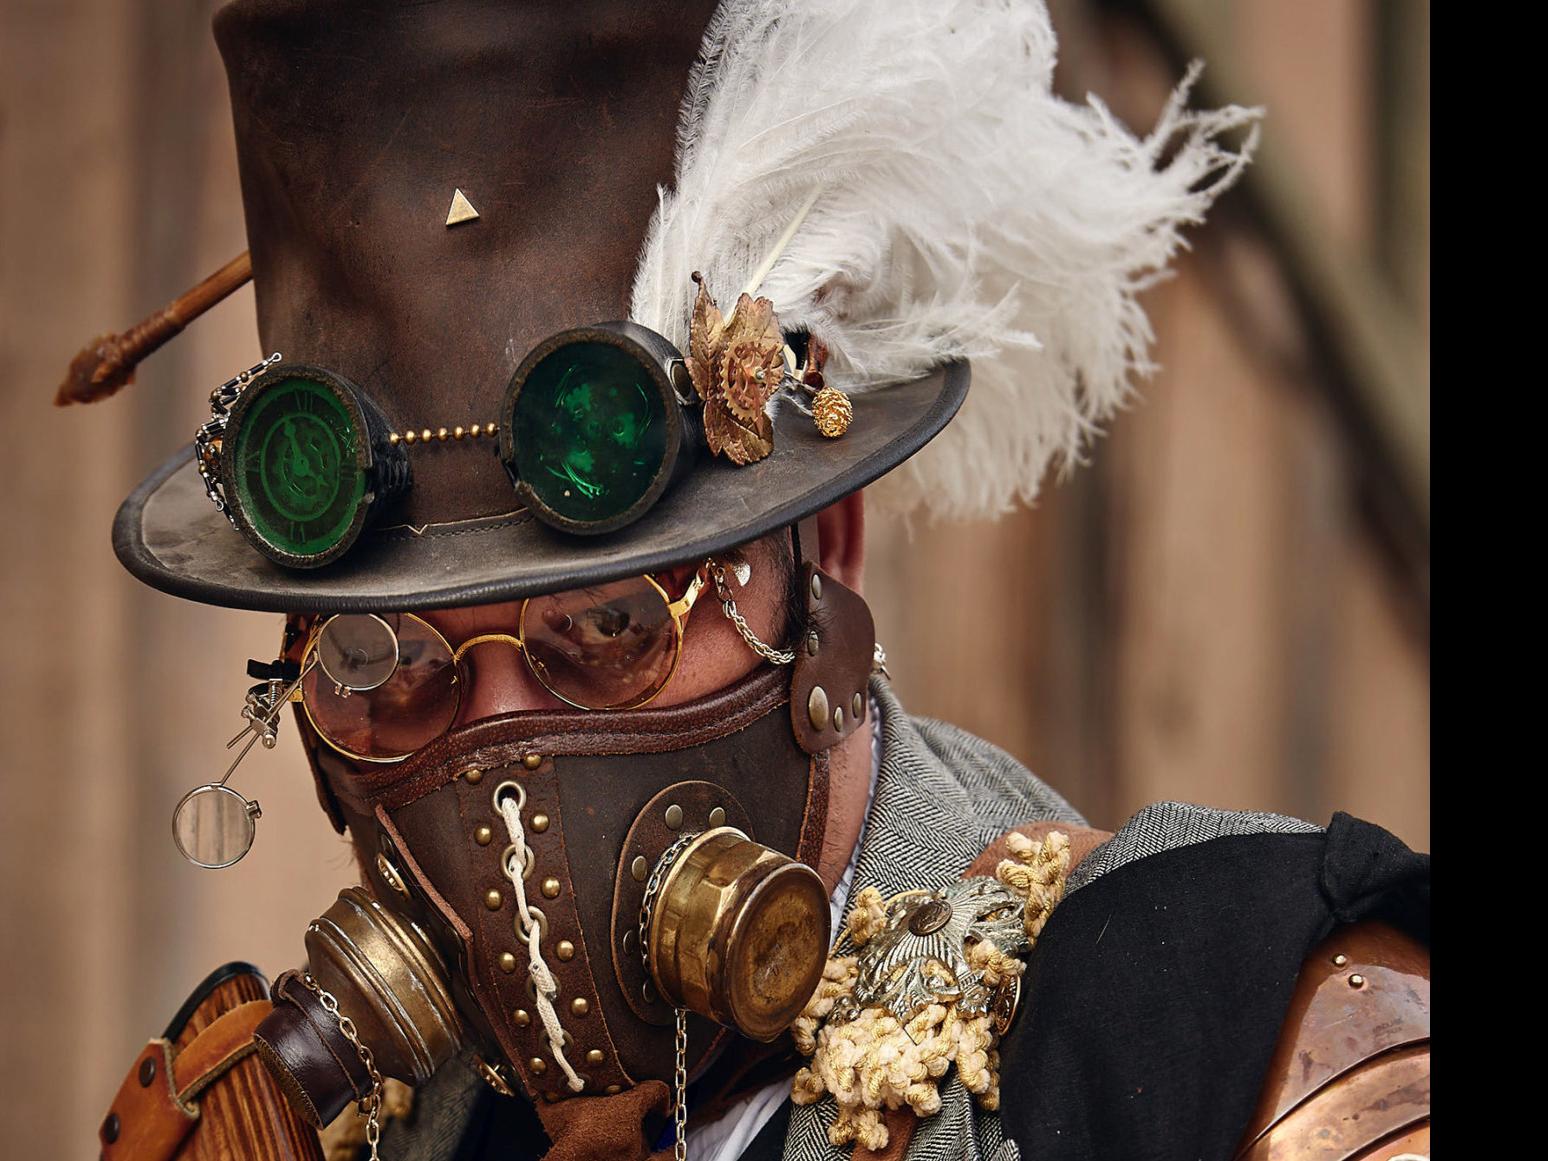 Steampunk Convention At Old Tucson Draws Wild Sights Elaborate Costumes Friends For Life Caliente Tucson Com